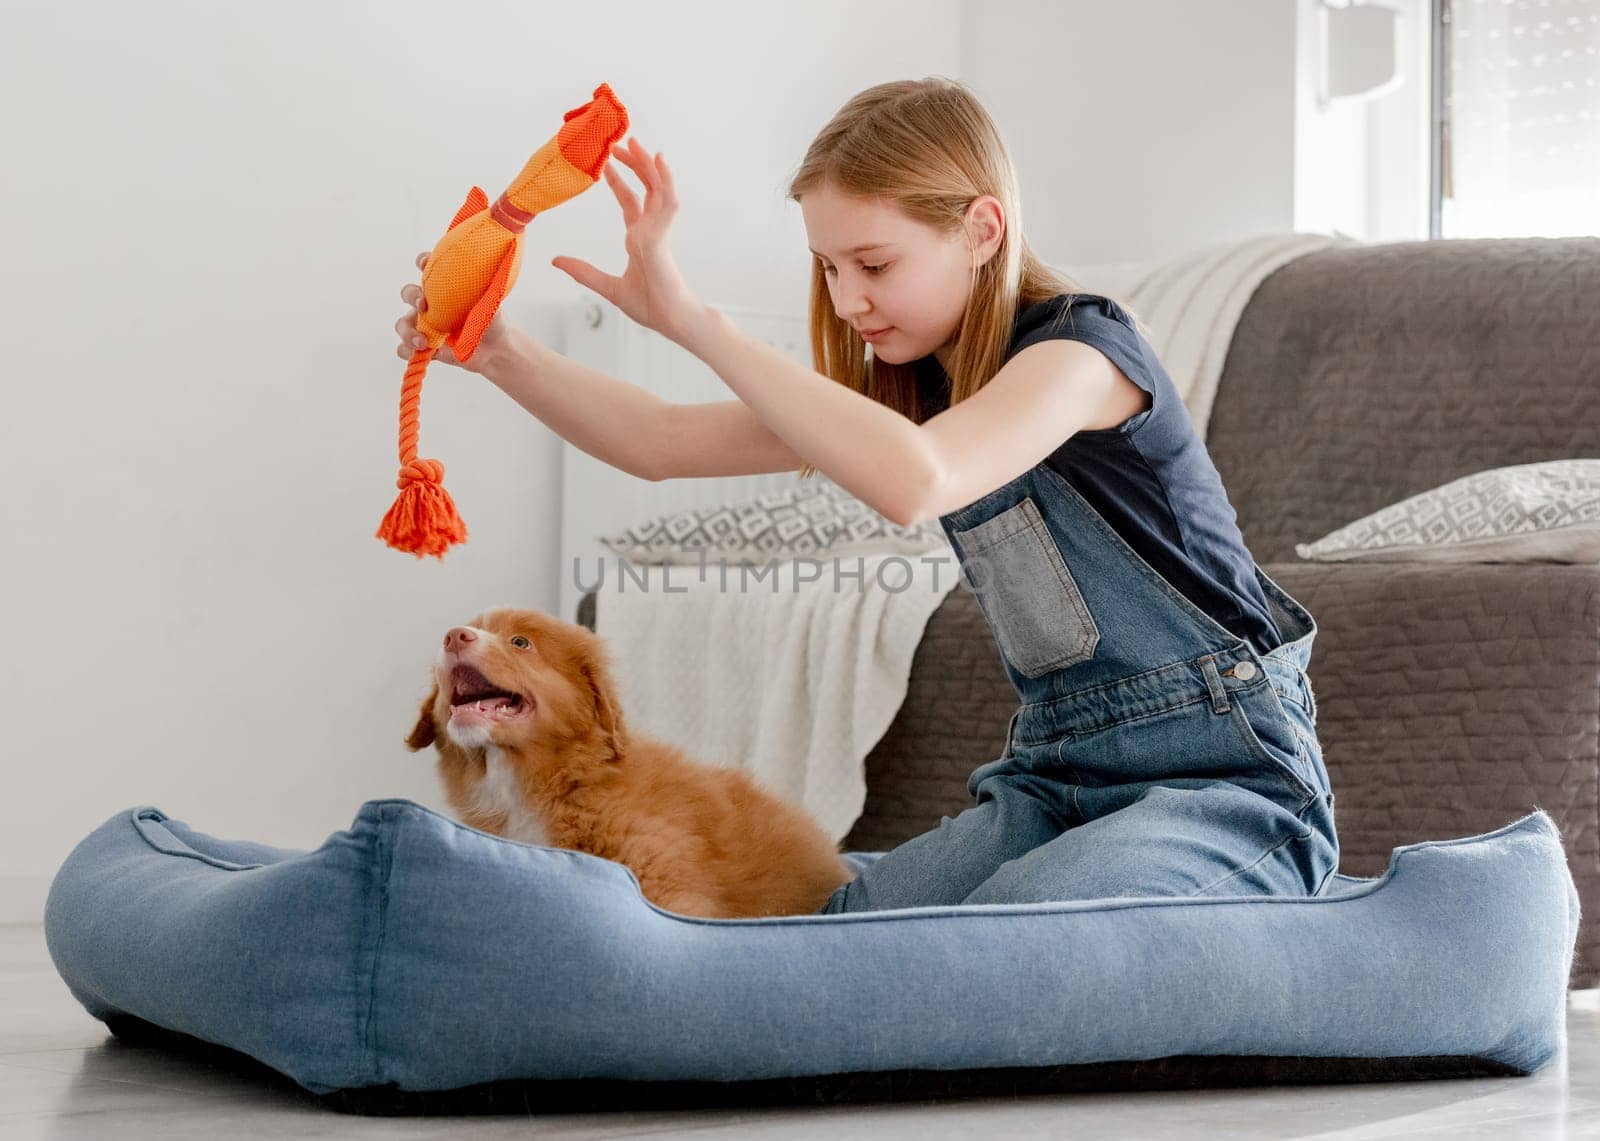 Little Girl Playing With Toller Puppy And Orange Duck Toy In Dog Bed by tan4ikk1